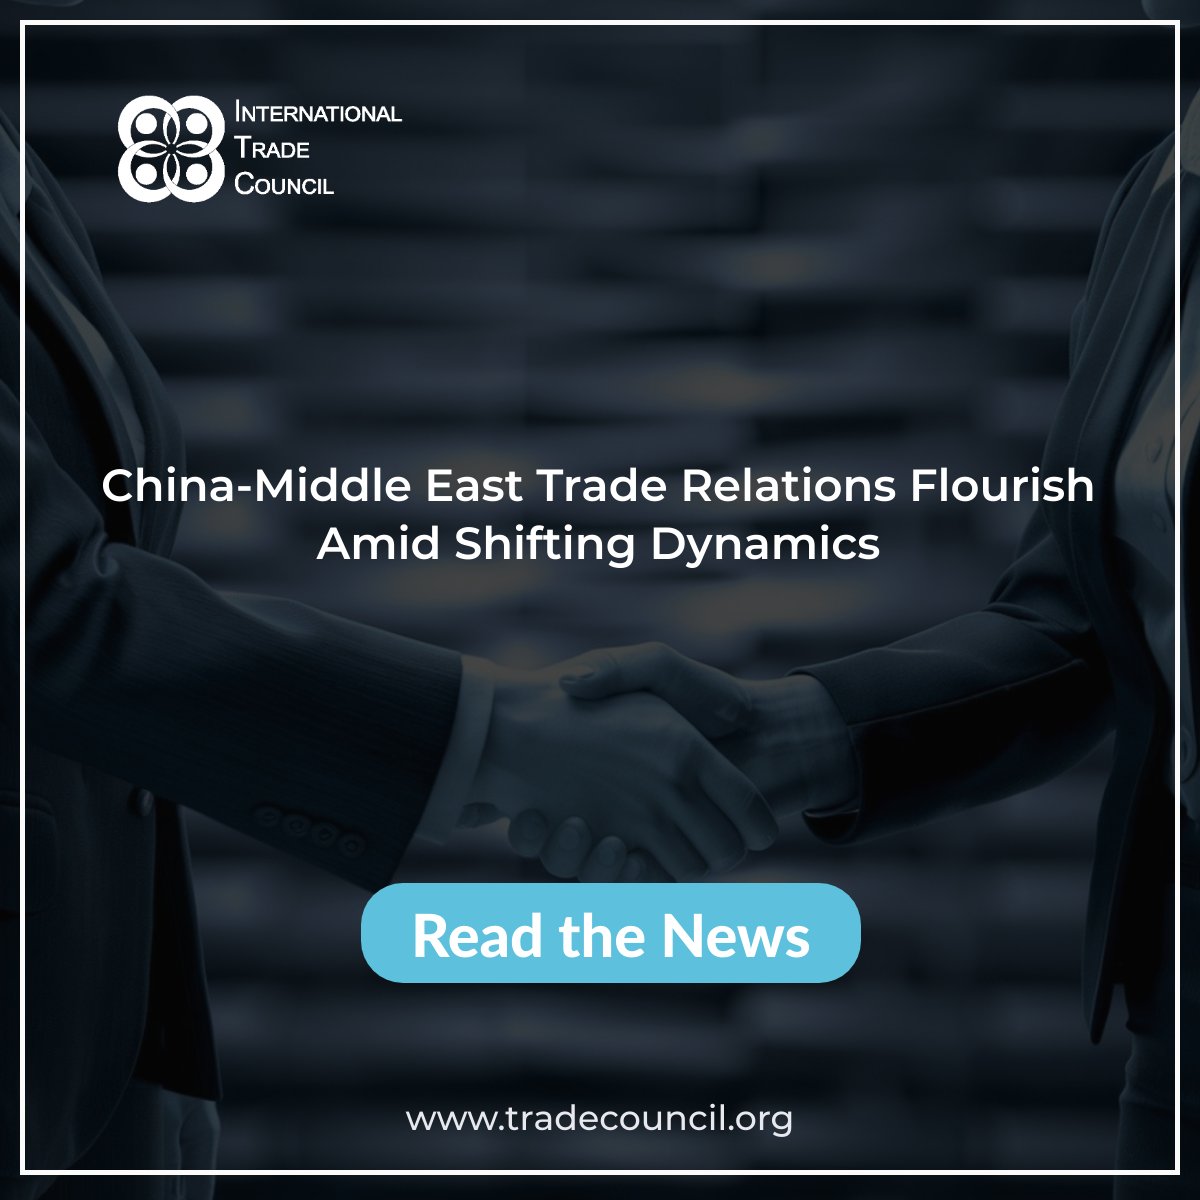 China-Middle East Trade Relations Flourish Amid Shifting Dynamics
Read The News: tradecouncil.org/china-middle-e…
#ITCNewsUpdates #BreakingNews #TradeRelations #EconomicDiplomacy #GlobalTrade #CommercialPartnerships #TradeShifts